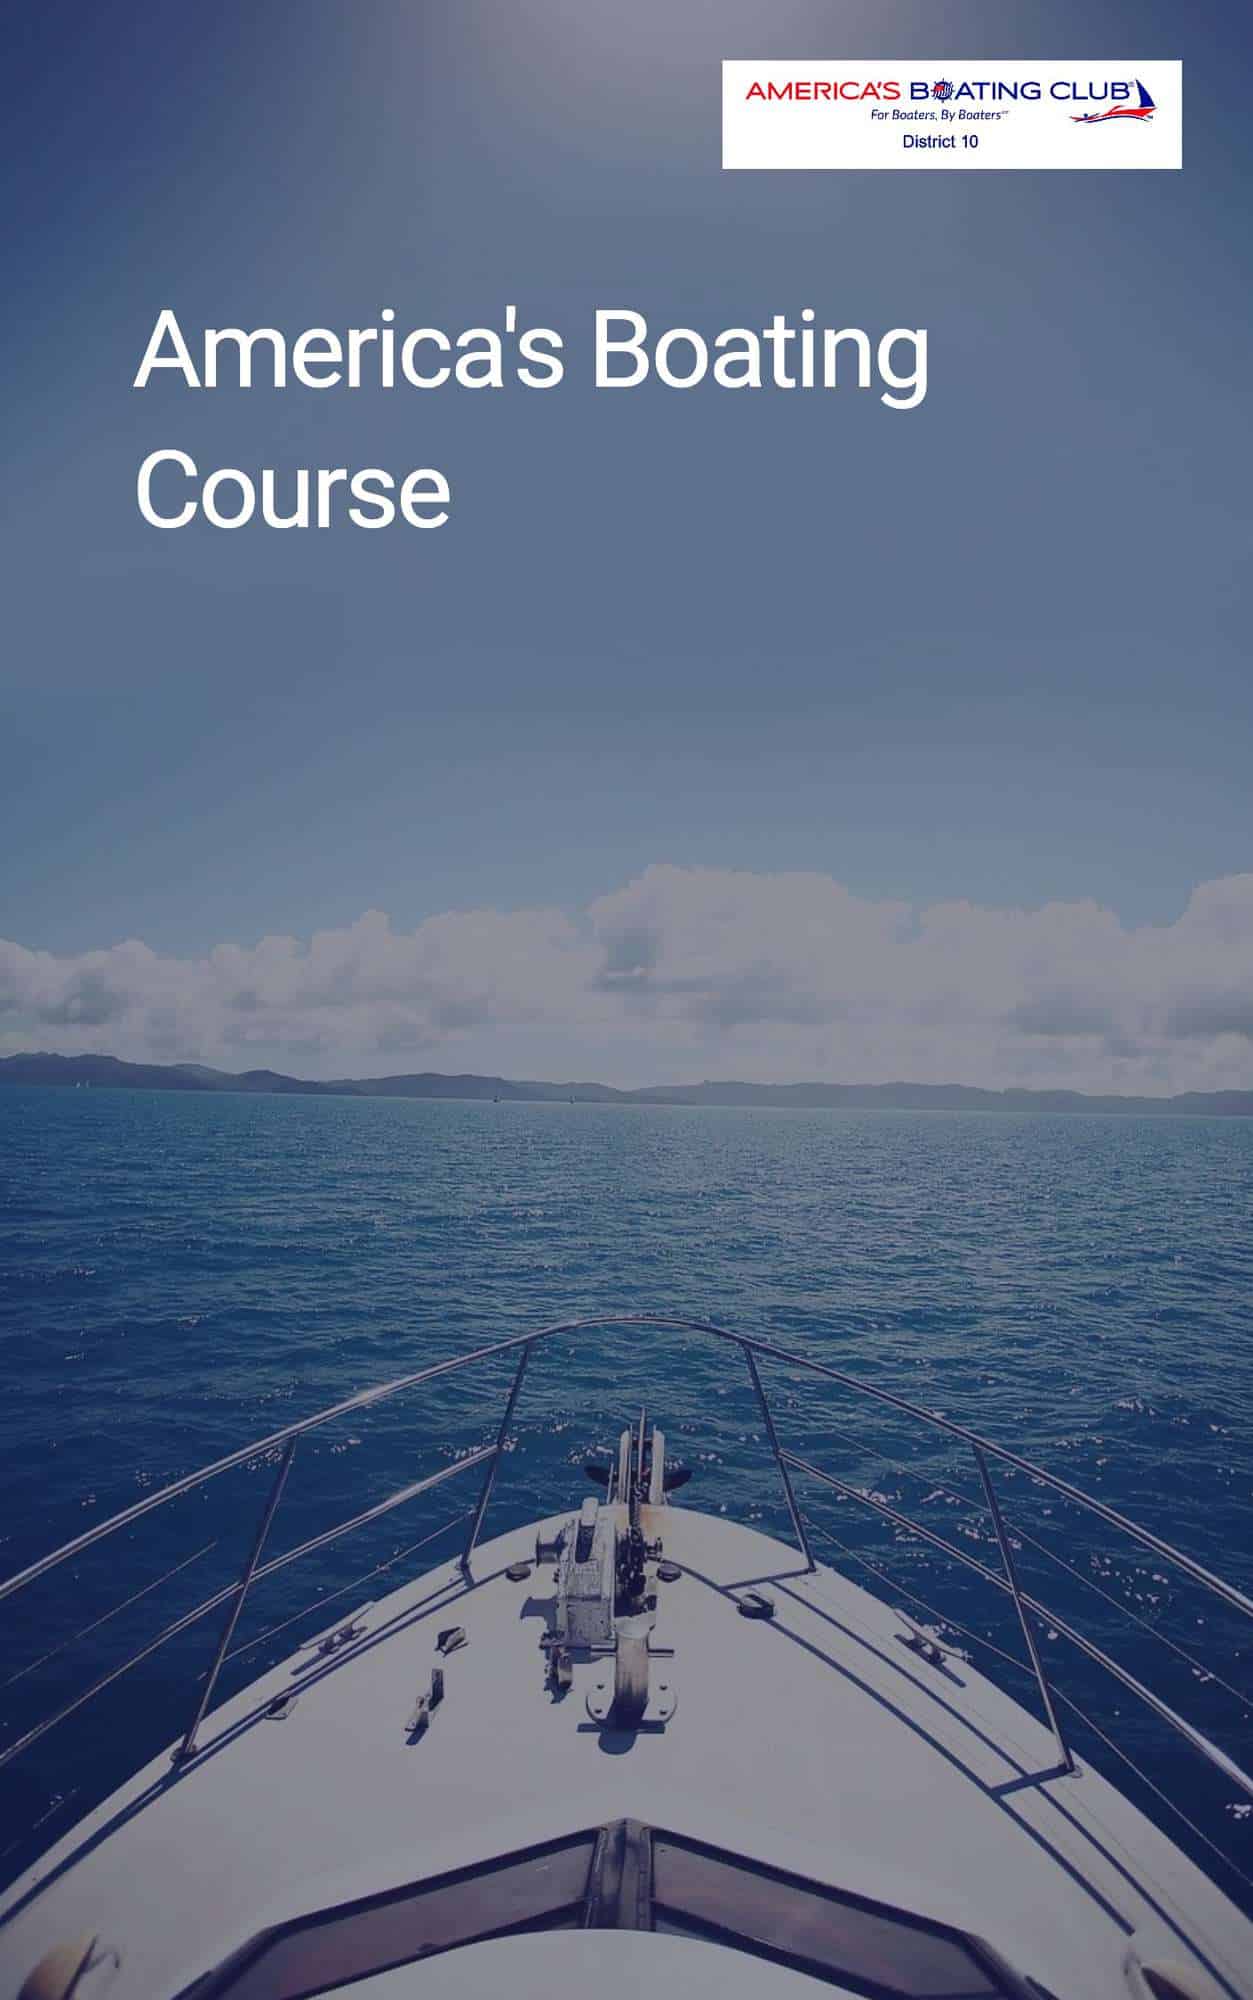 America's Boating Course